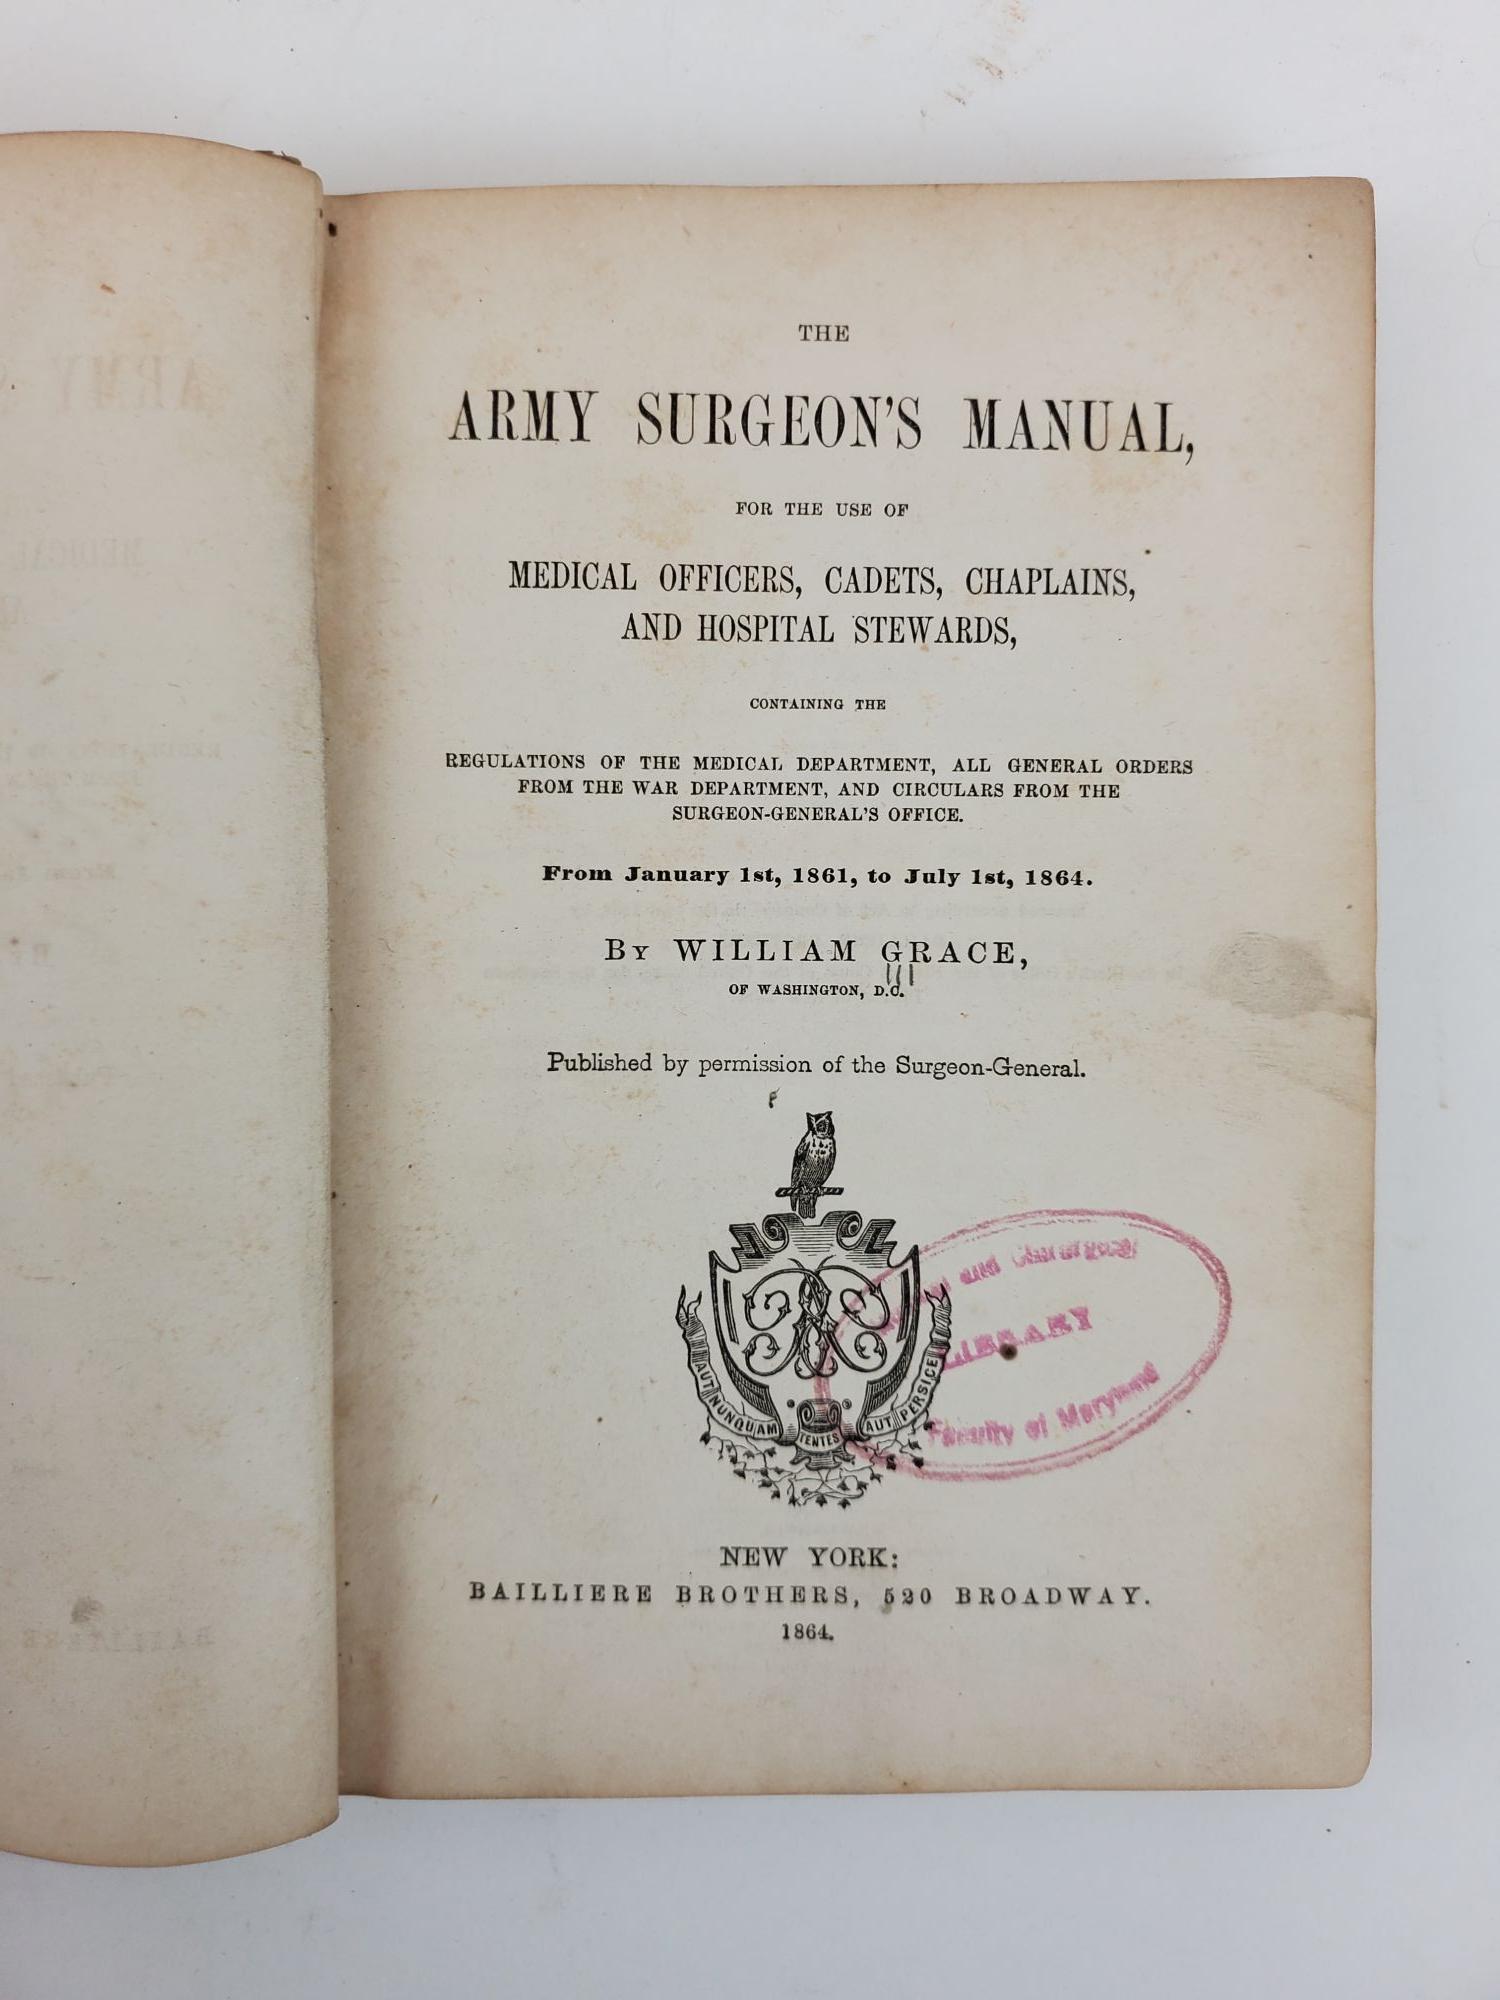 Product Image for THE ARMY SURGEON'S MANUAL, FOR THE USE OF MEDICAL OFFICERS, CADETS, CHAPLAINS, AND HOSPITAL STEWARDS, CONTAINING THE REGULATIONS OF THE MEDICAL DEPARTMENT, ALL GENERAL ORDERS FROM THE WAR DEPARTMENT, AND CIRCULARS FROM THE SURGEON-GENERAL'S OFFICE [Associ